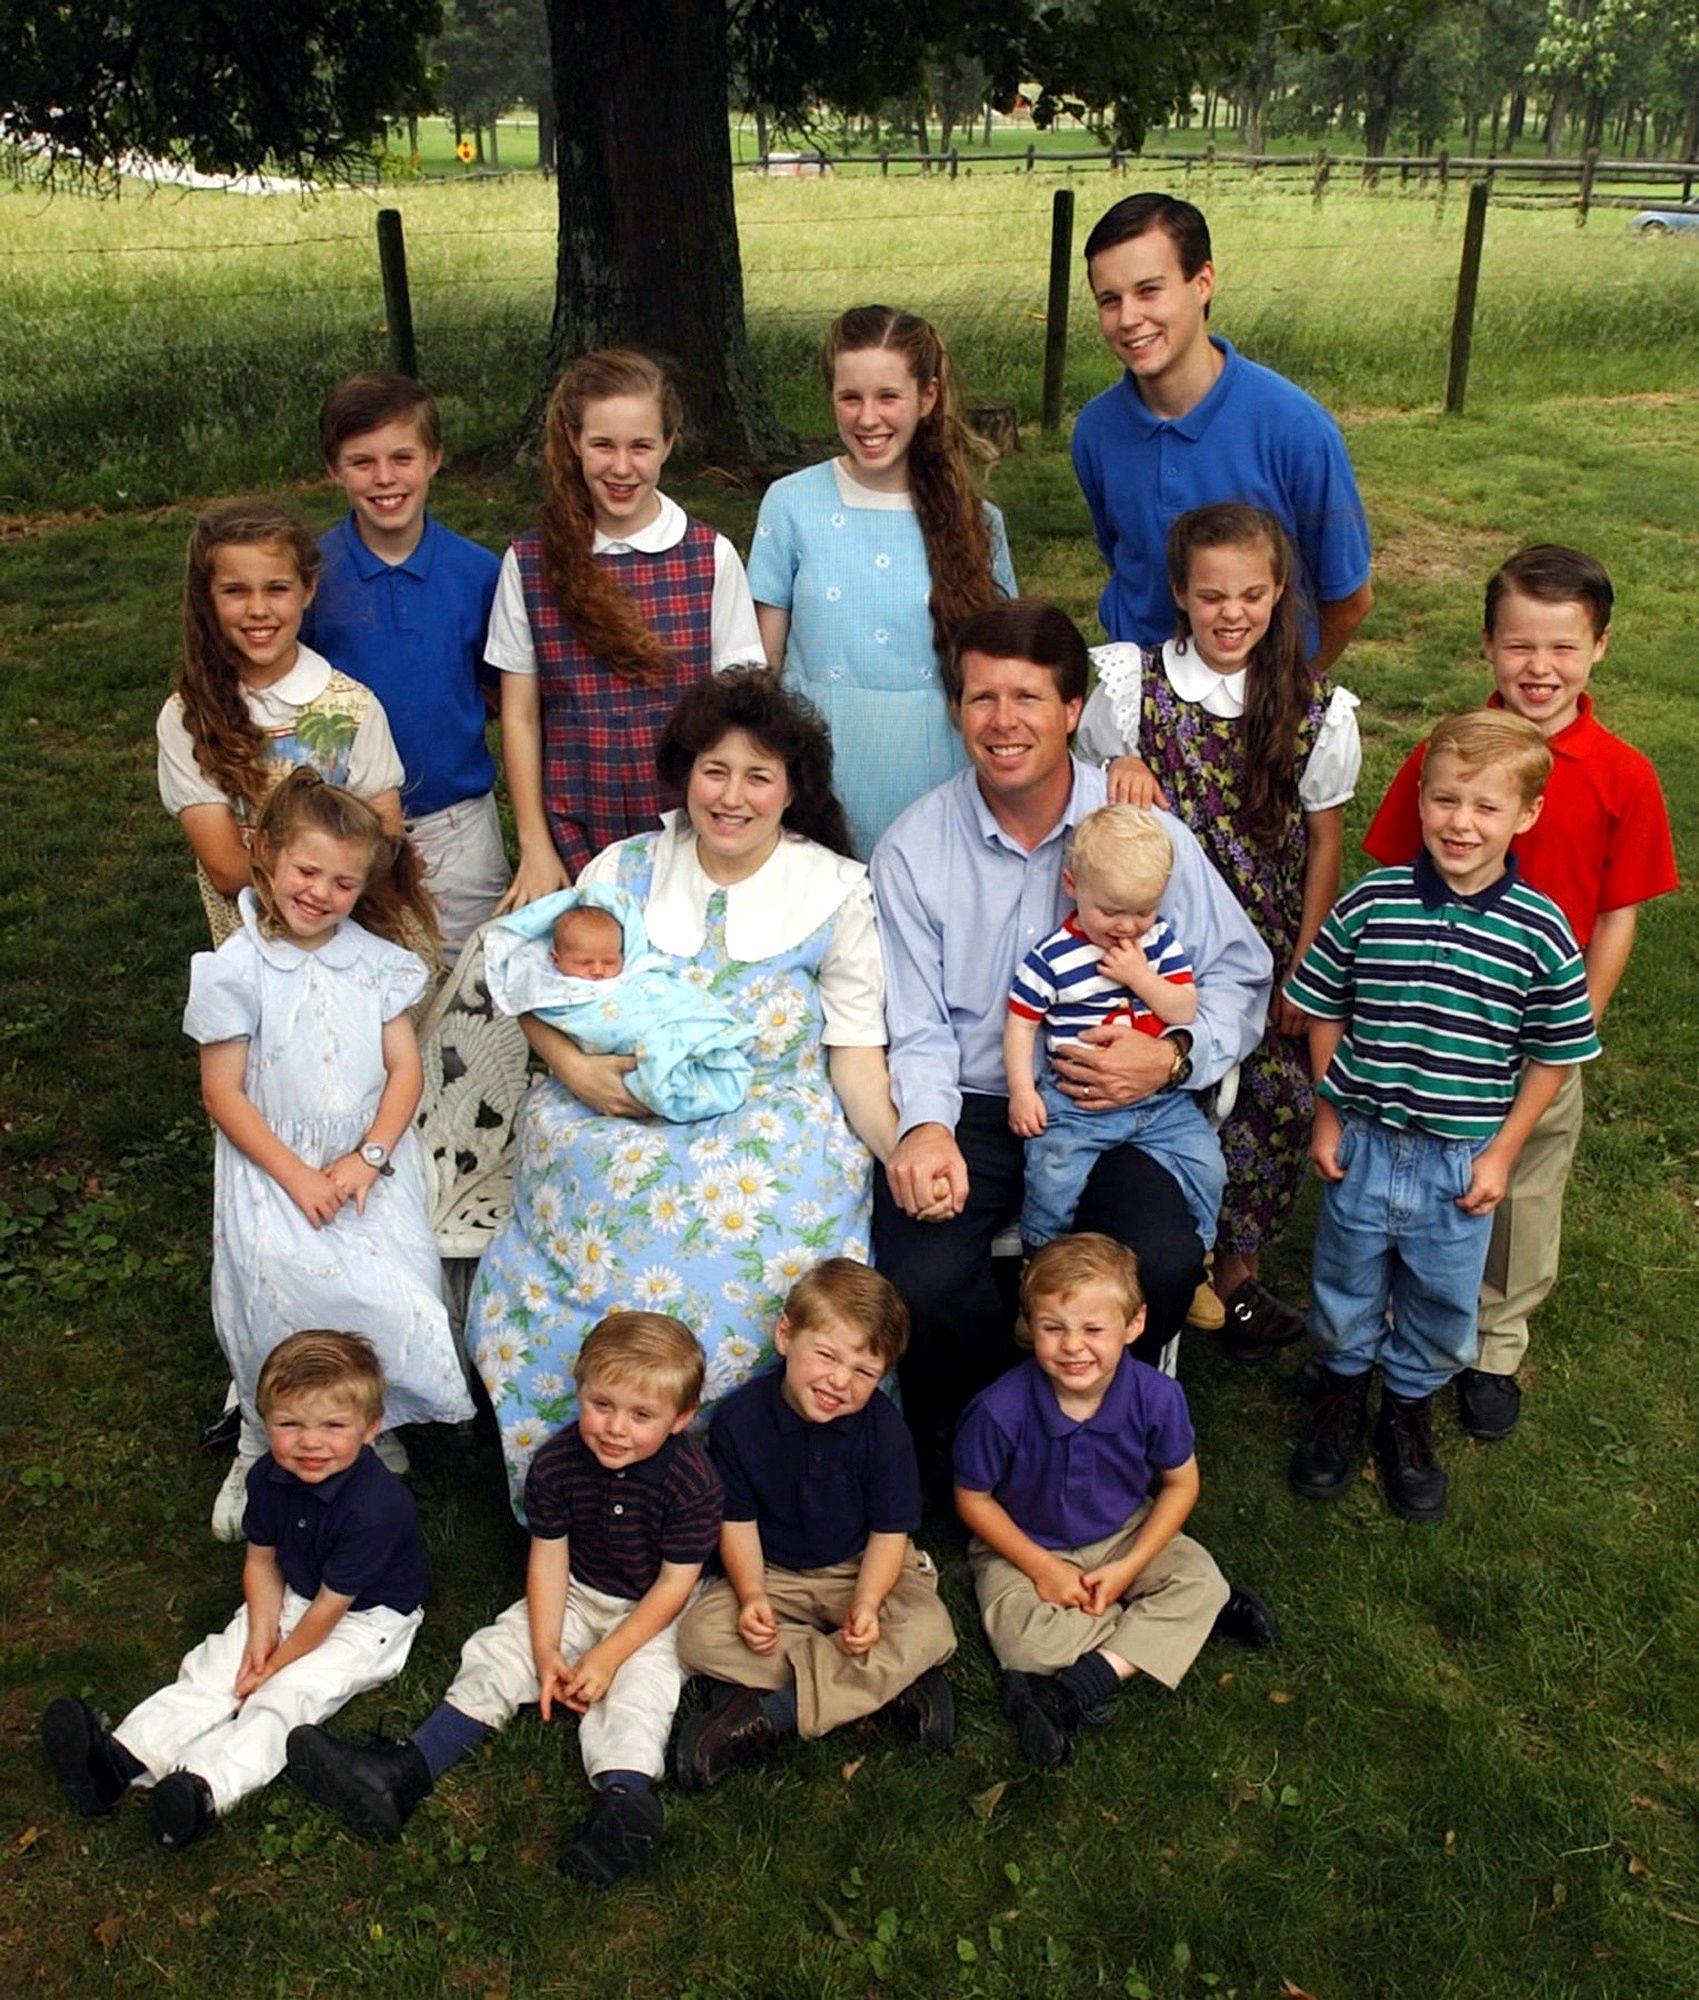 Michelle Duggar, 37, holds her 15th child, Jackson, who was born May 23, 2004 in a family photo.